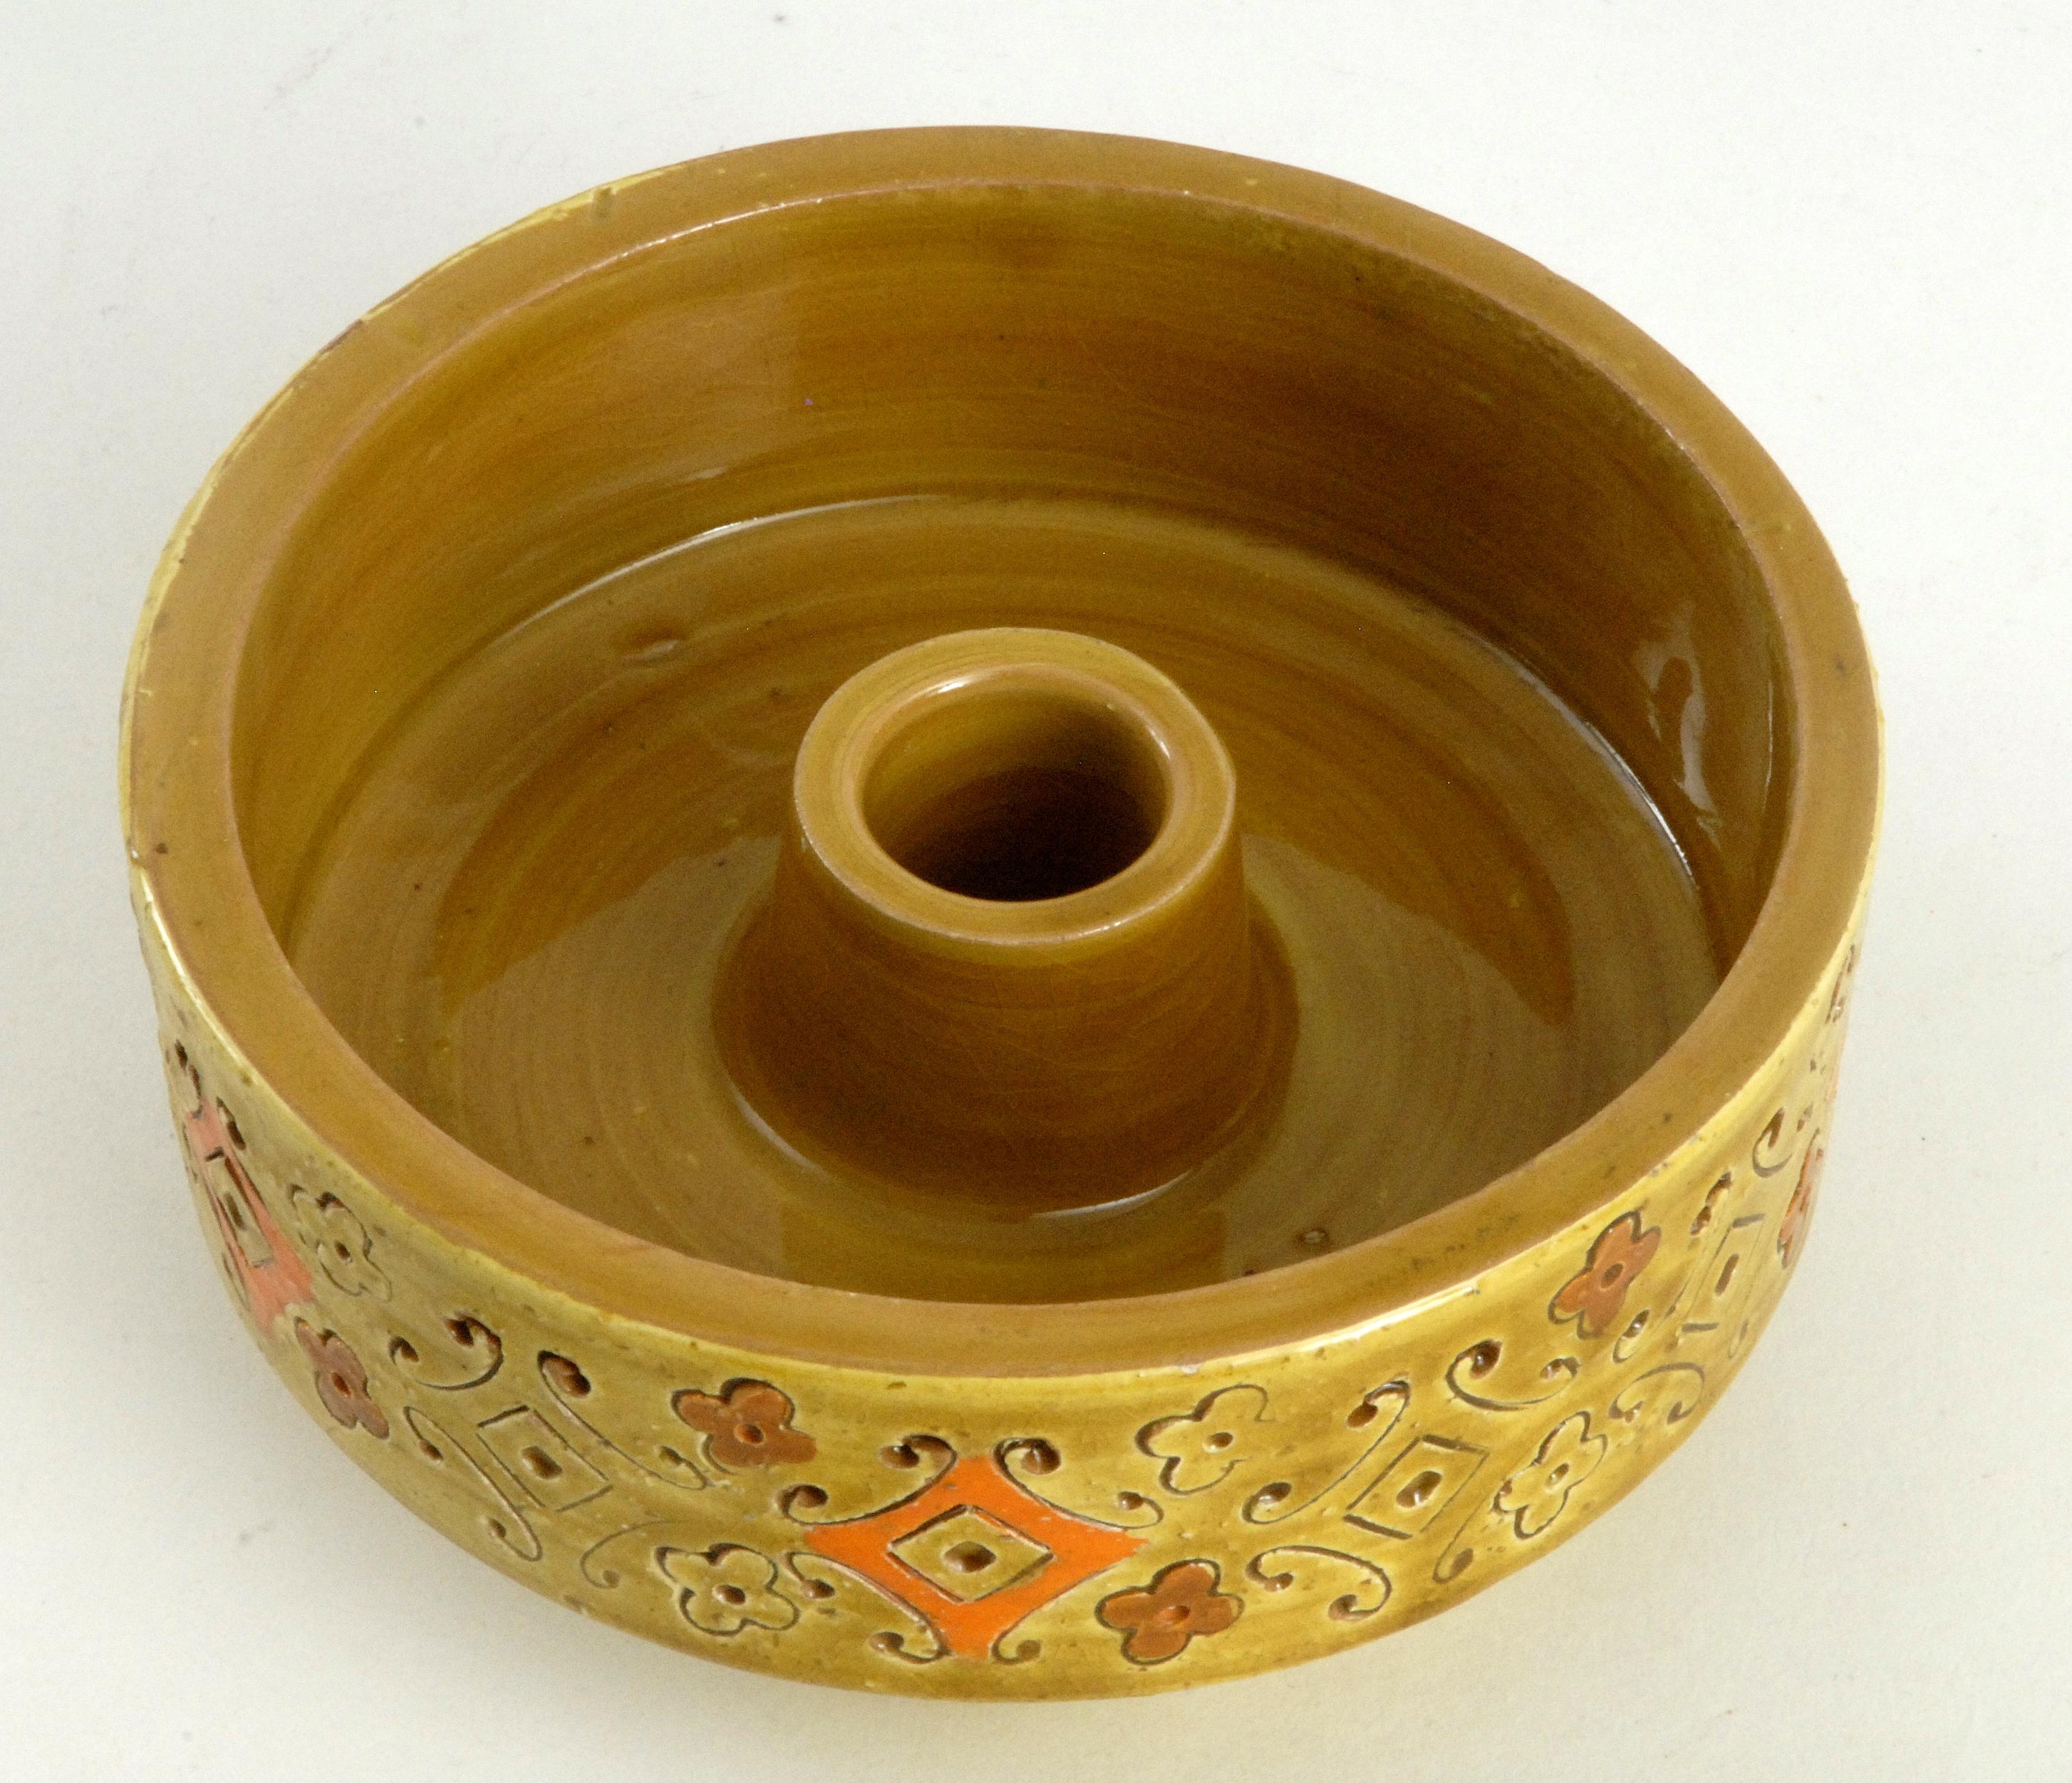 An Aldo Londi designed candleholder with a yellow version of the Spagnoli [Spanish] pattern.